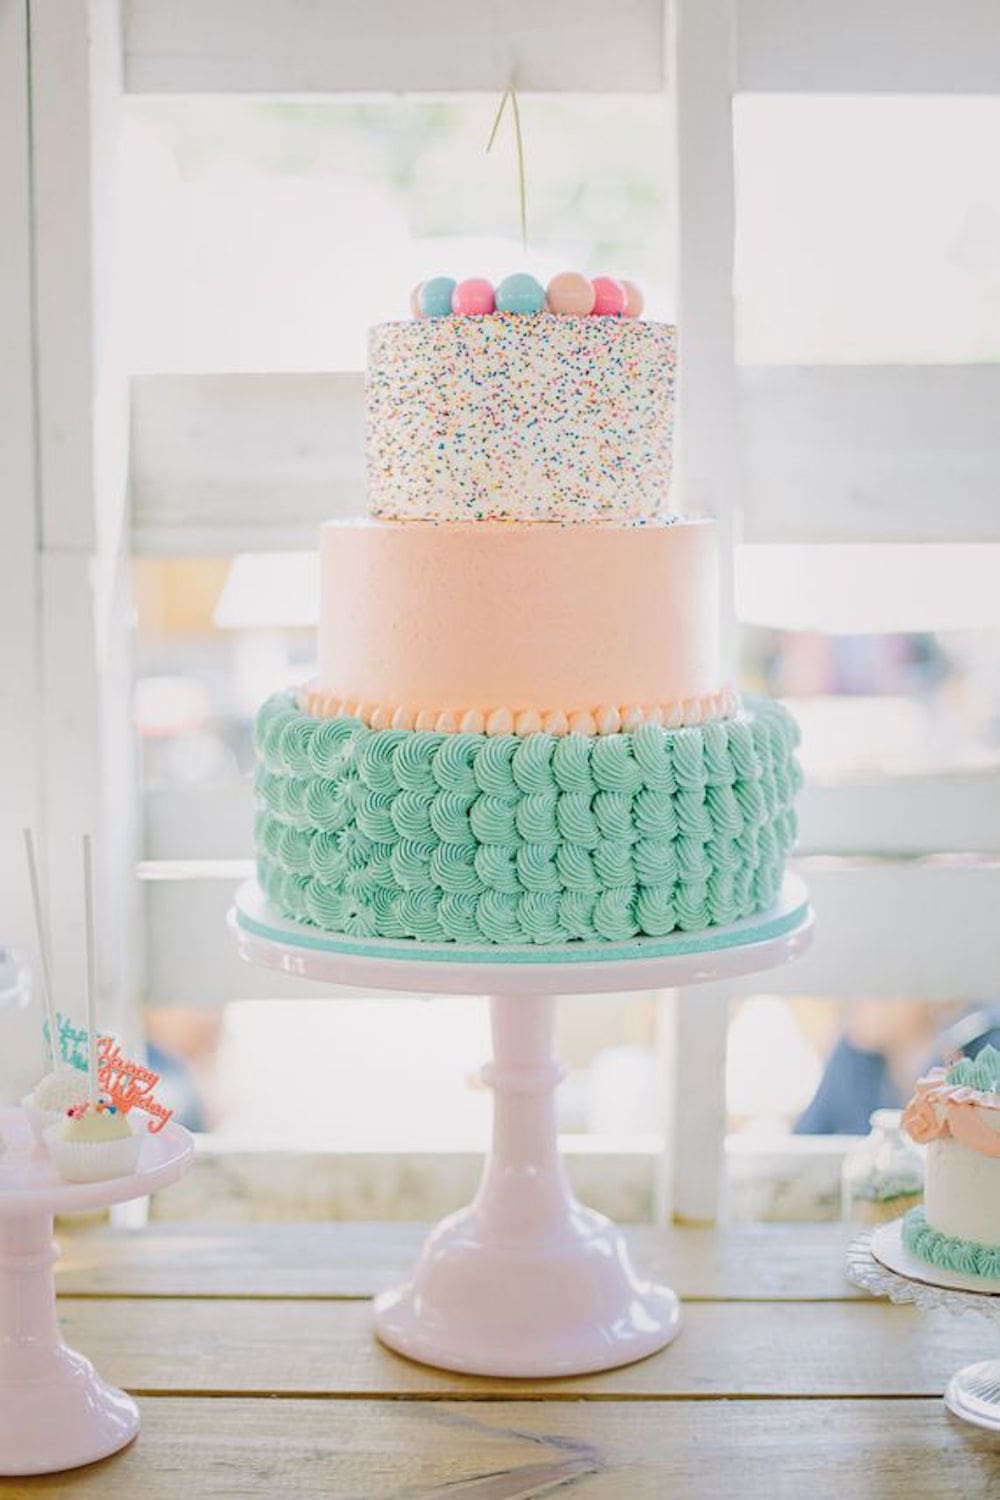 Birthday Cake Pinterest
 5 WAYS TO THROW AN ADORABLE COLORFUL KIDS PARTY